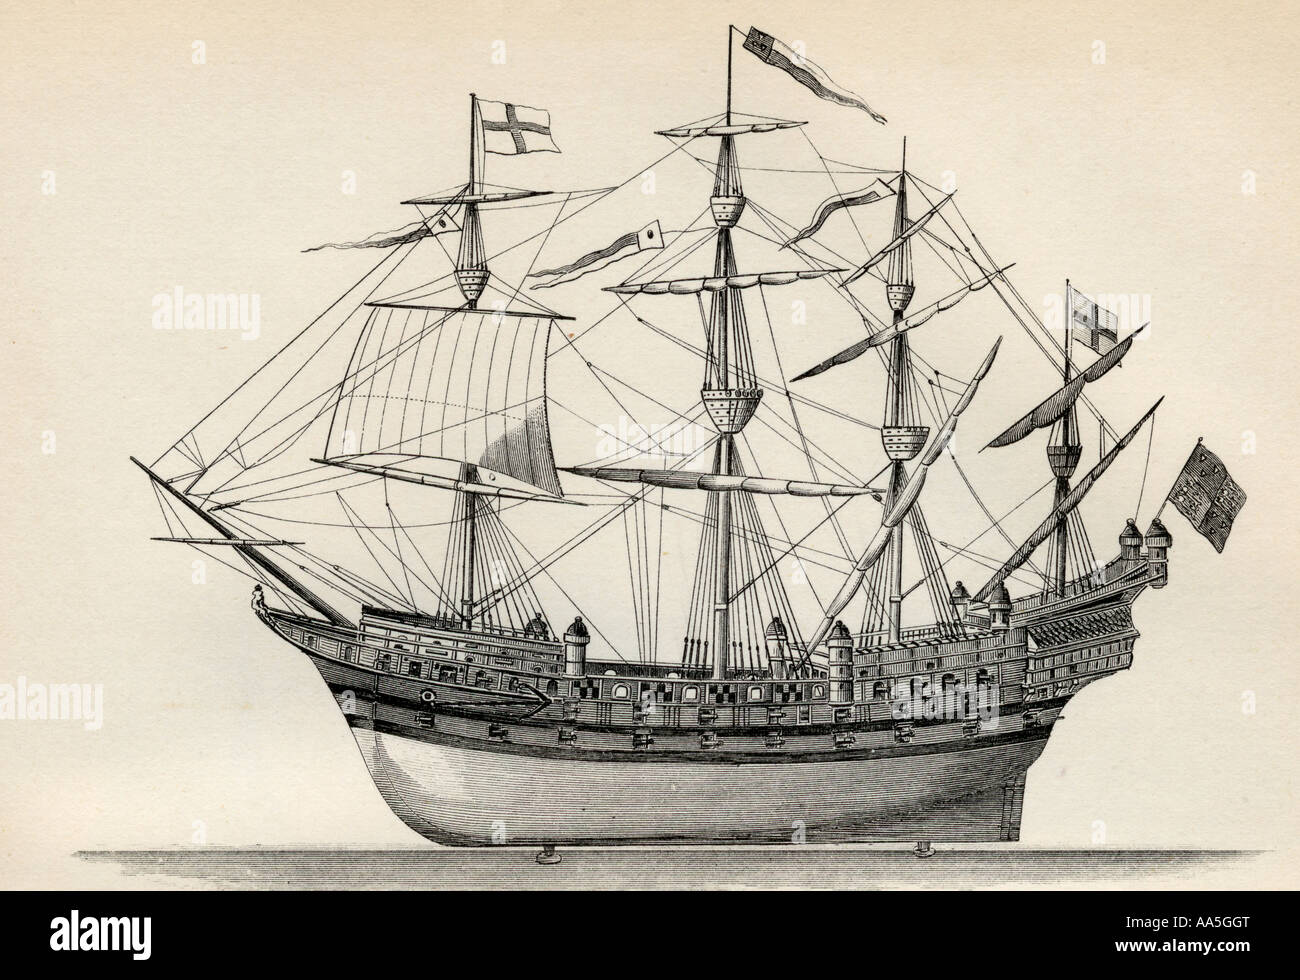 Henri Grace a Dieu or The Great Harry. English warship built 1514 Stock Photo